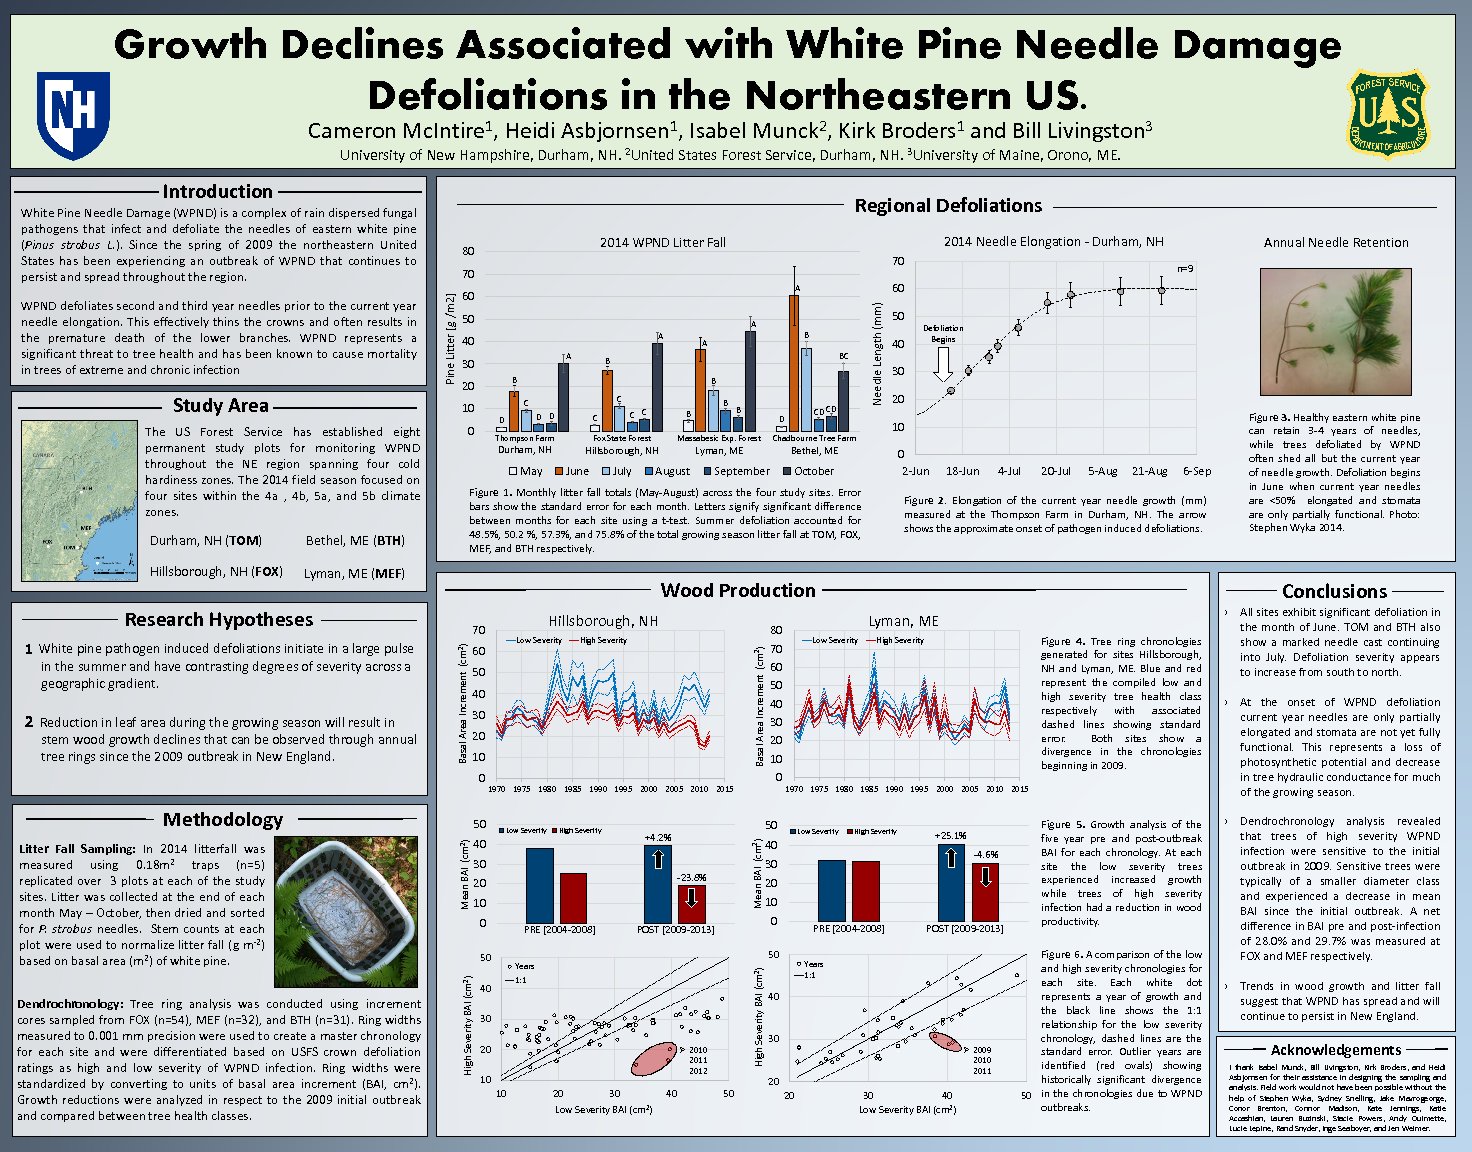 Growth Declines Associated With White Pine Needle Damage Defoliations In The Northeastern Us. by cm11